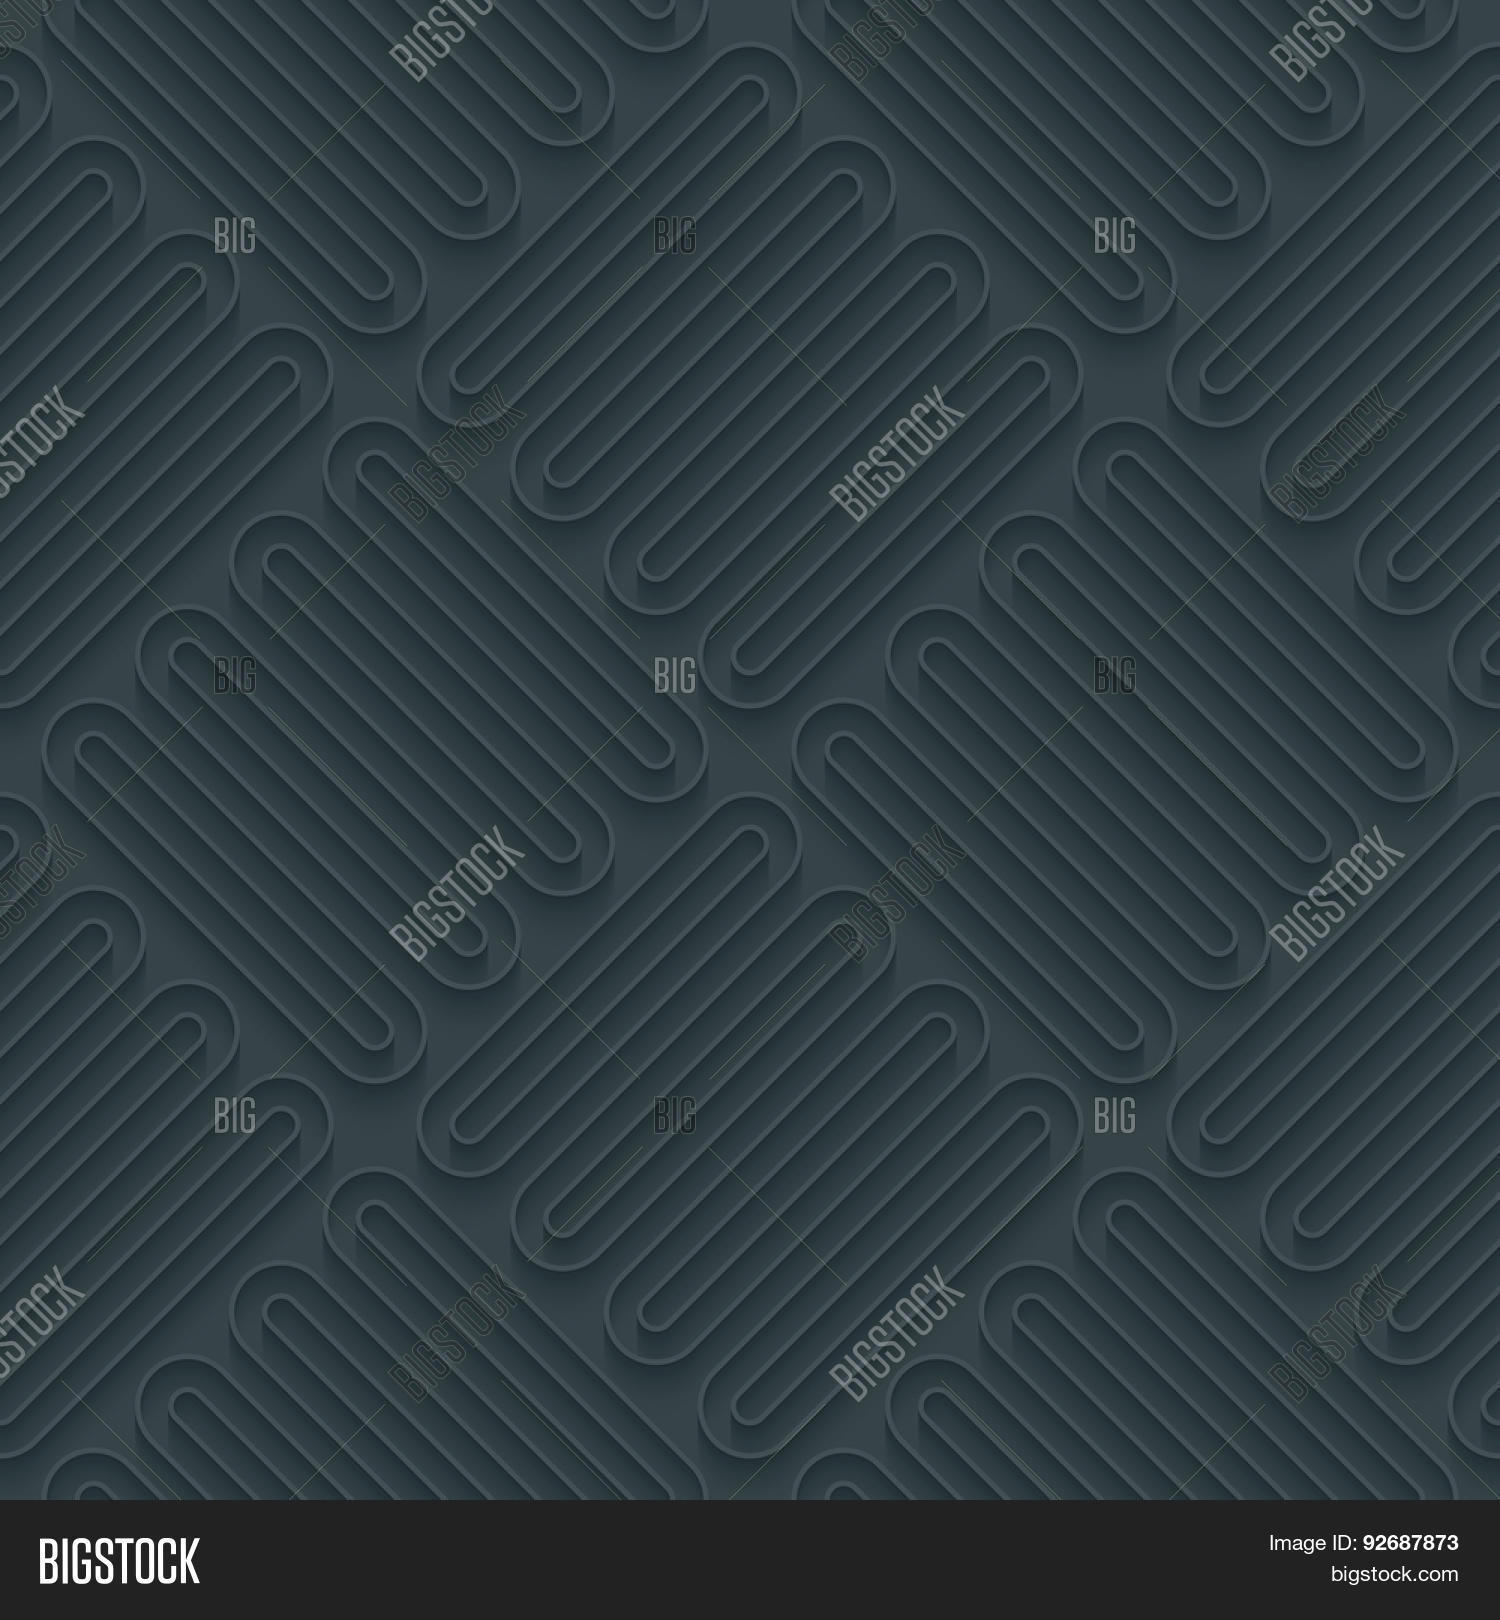 Checked Dark Perforated Paper Vector & Photo | Bigstock